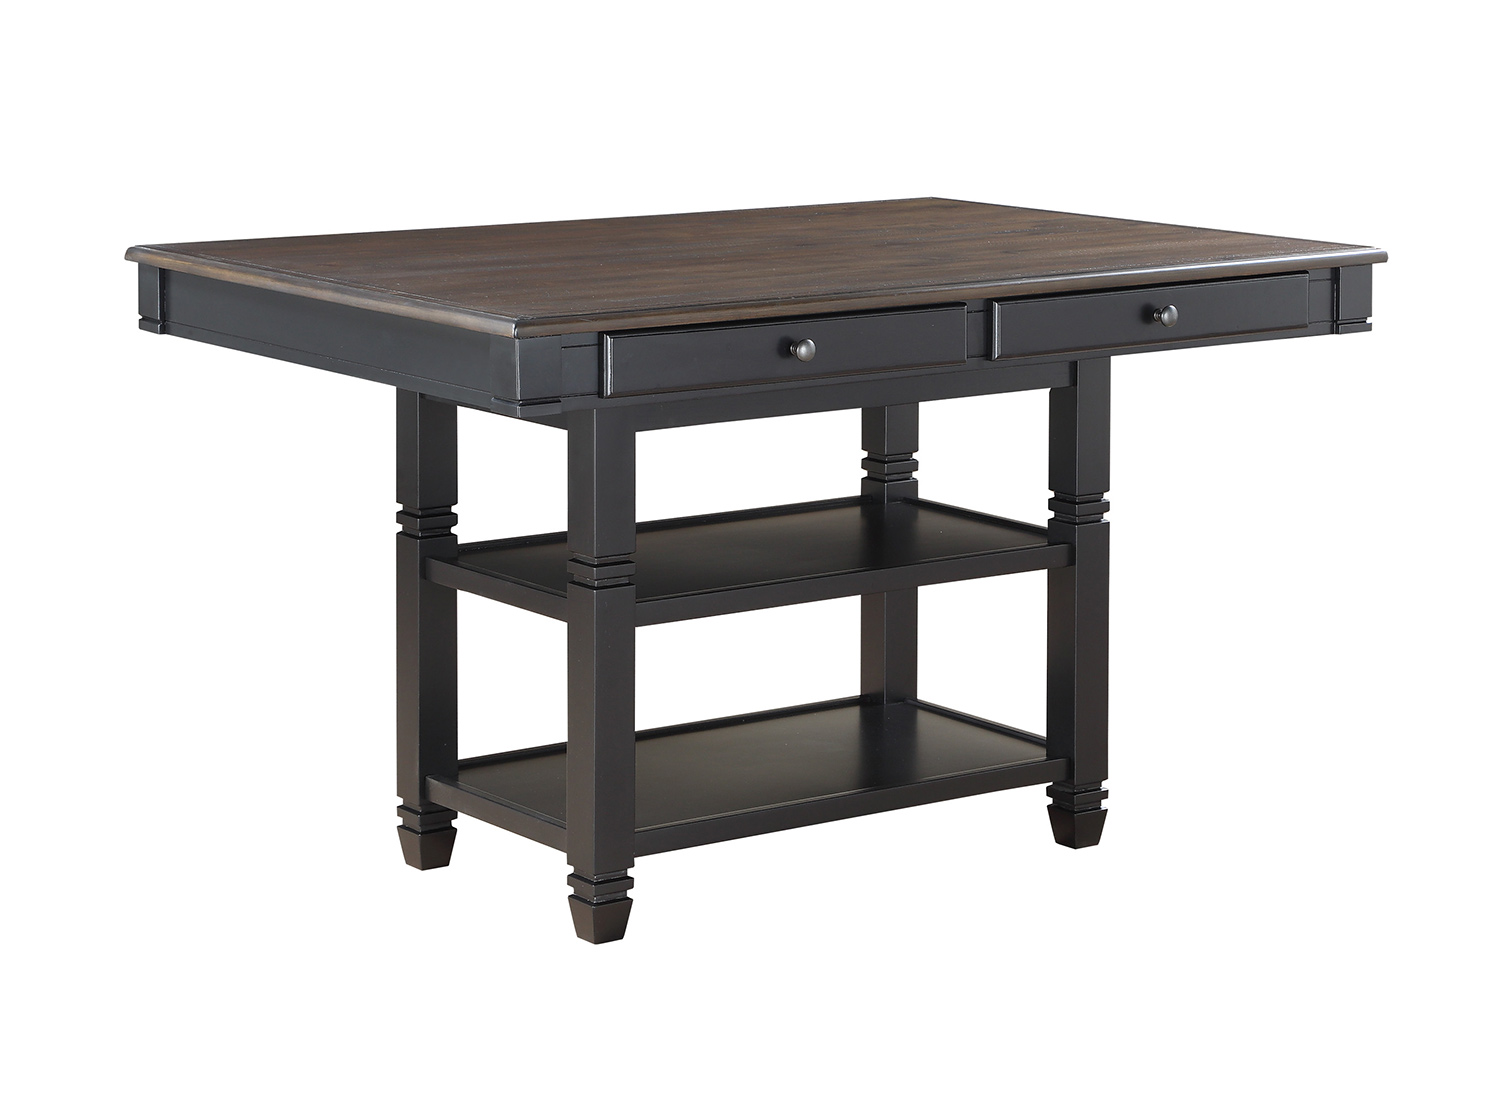 Homelegance Baywater Counter Height Dining Table - Black -Natural